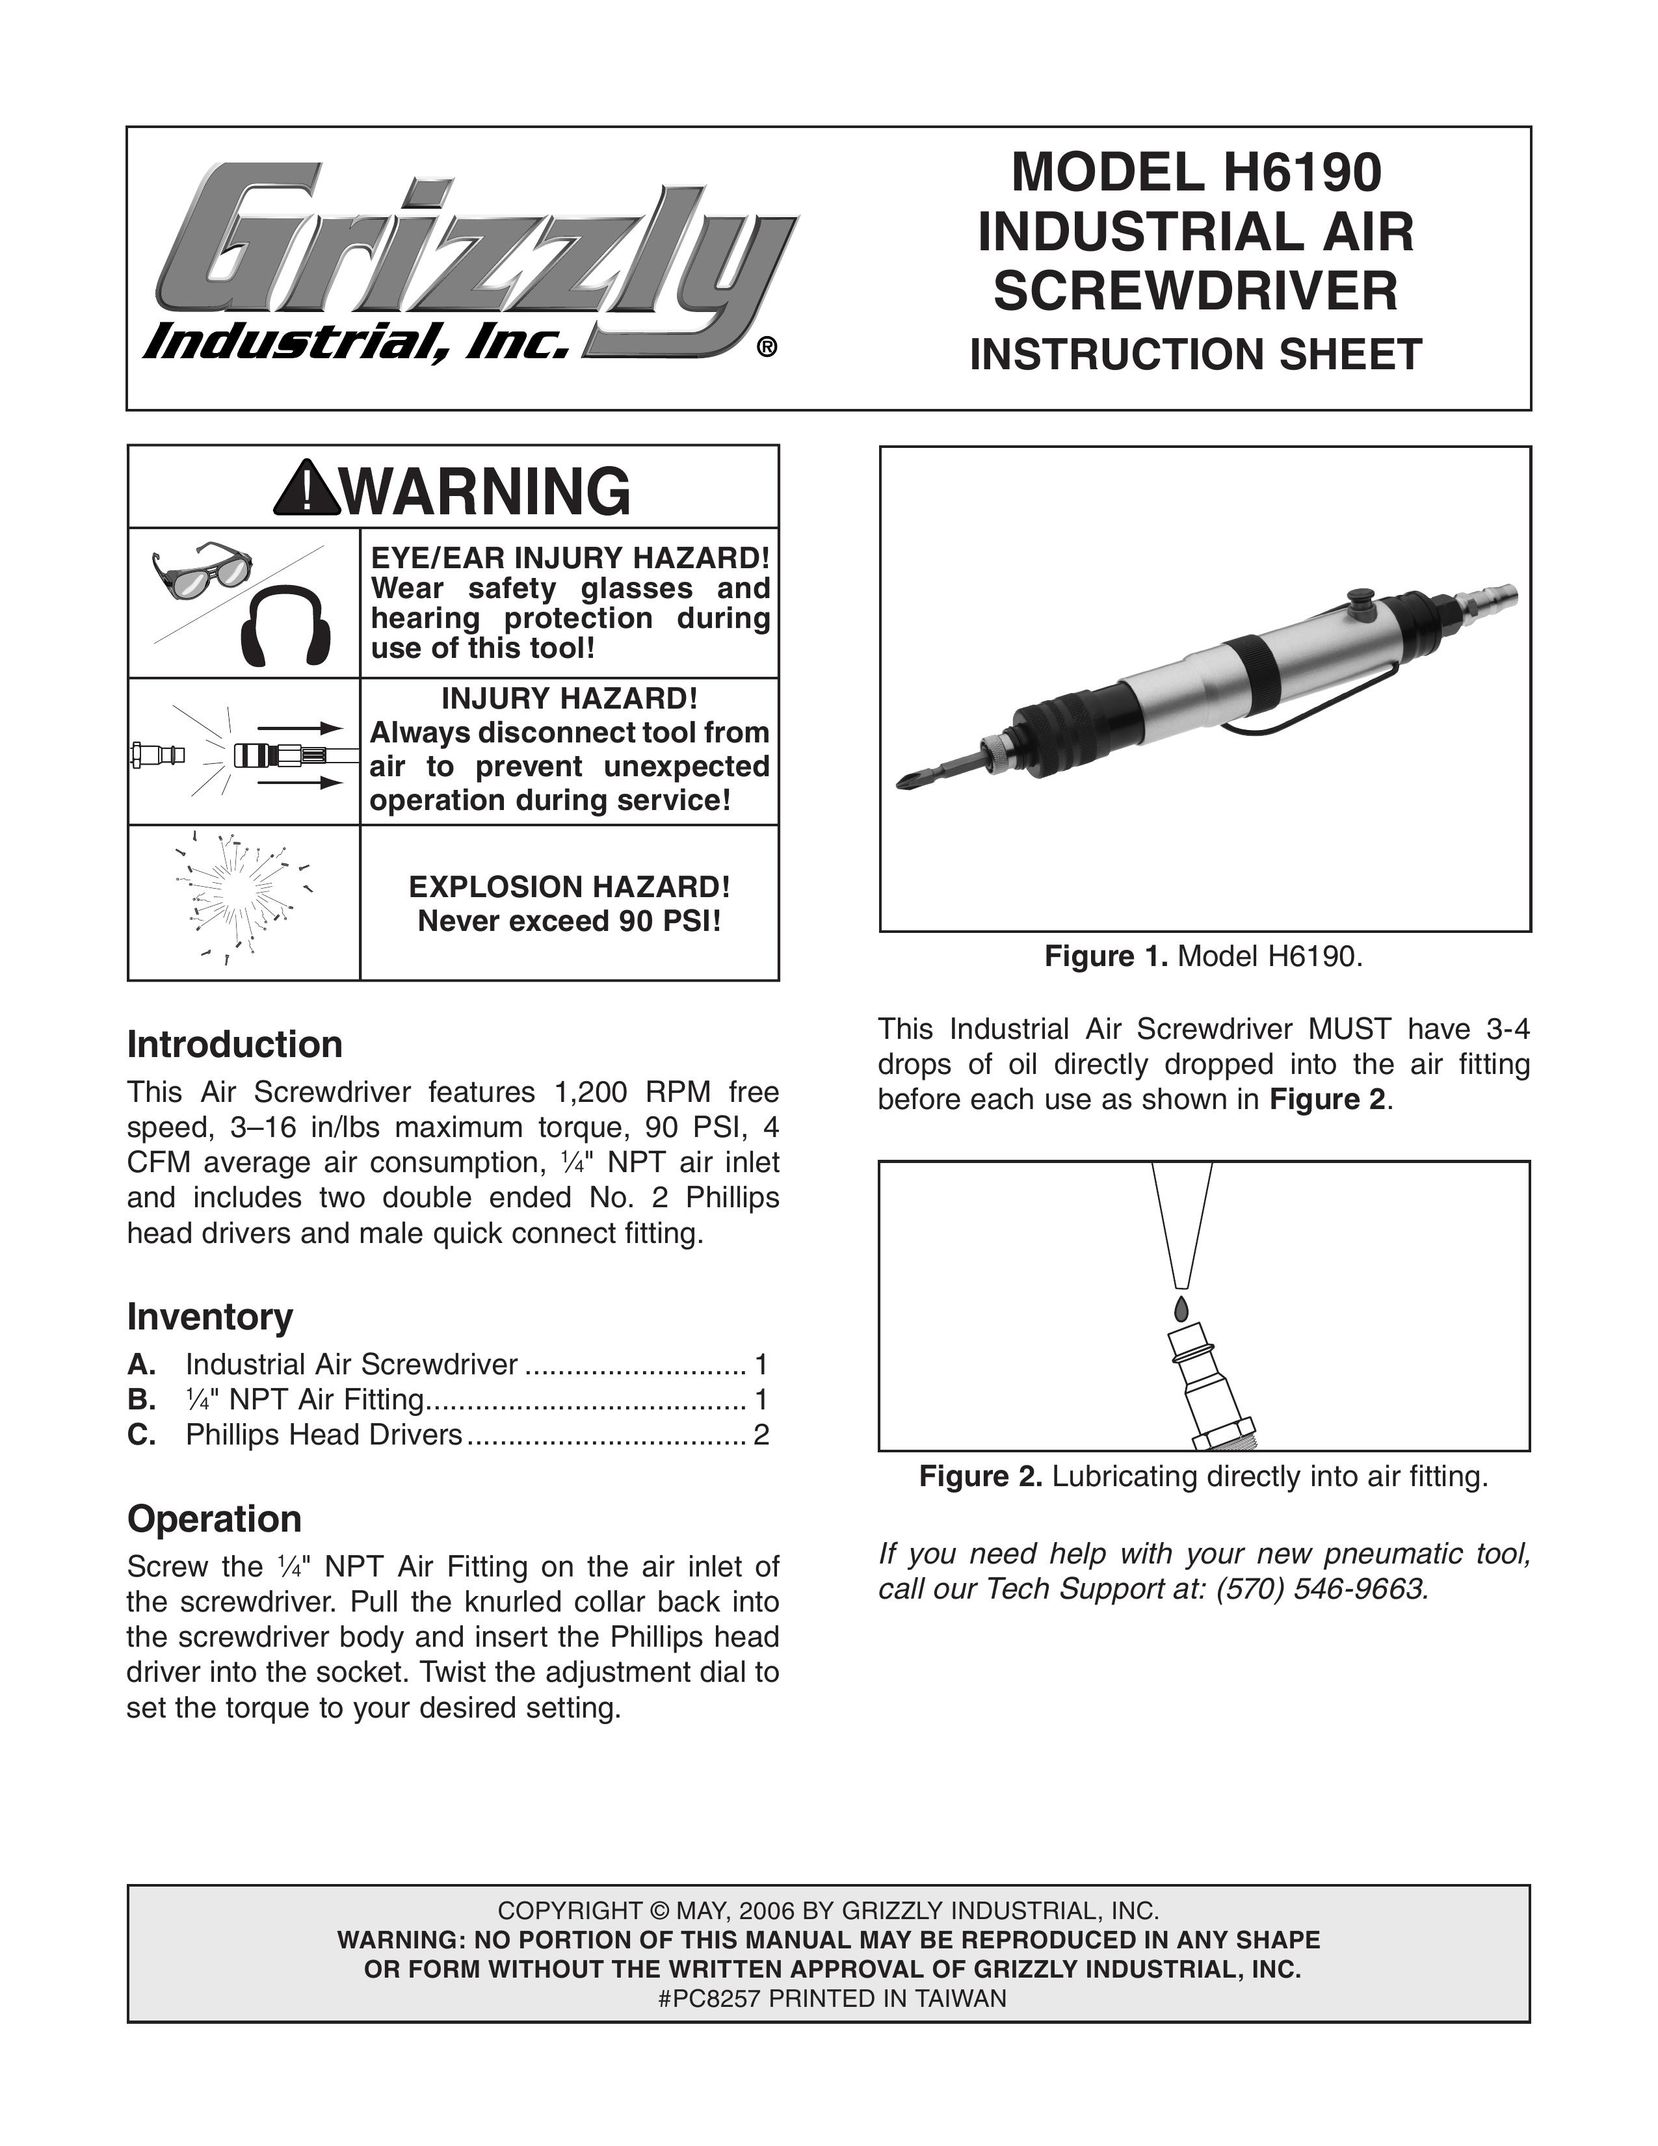 Grizzly H6190 Power Screwdriver User Manual